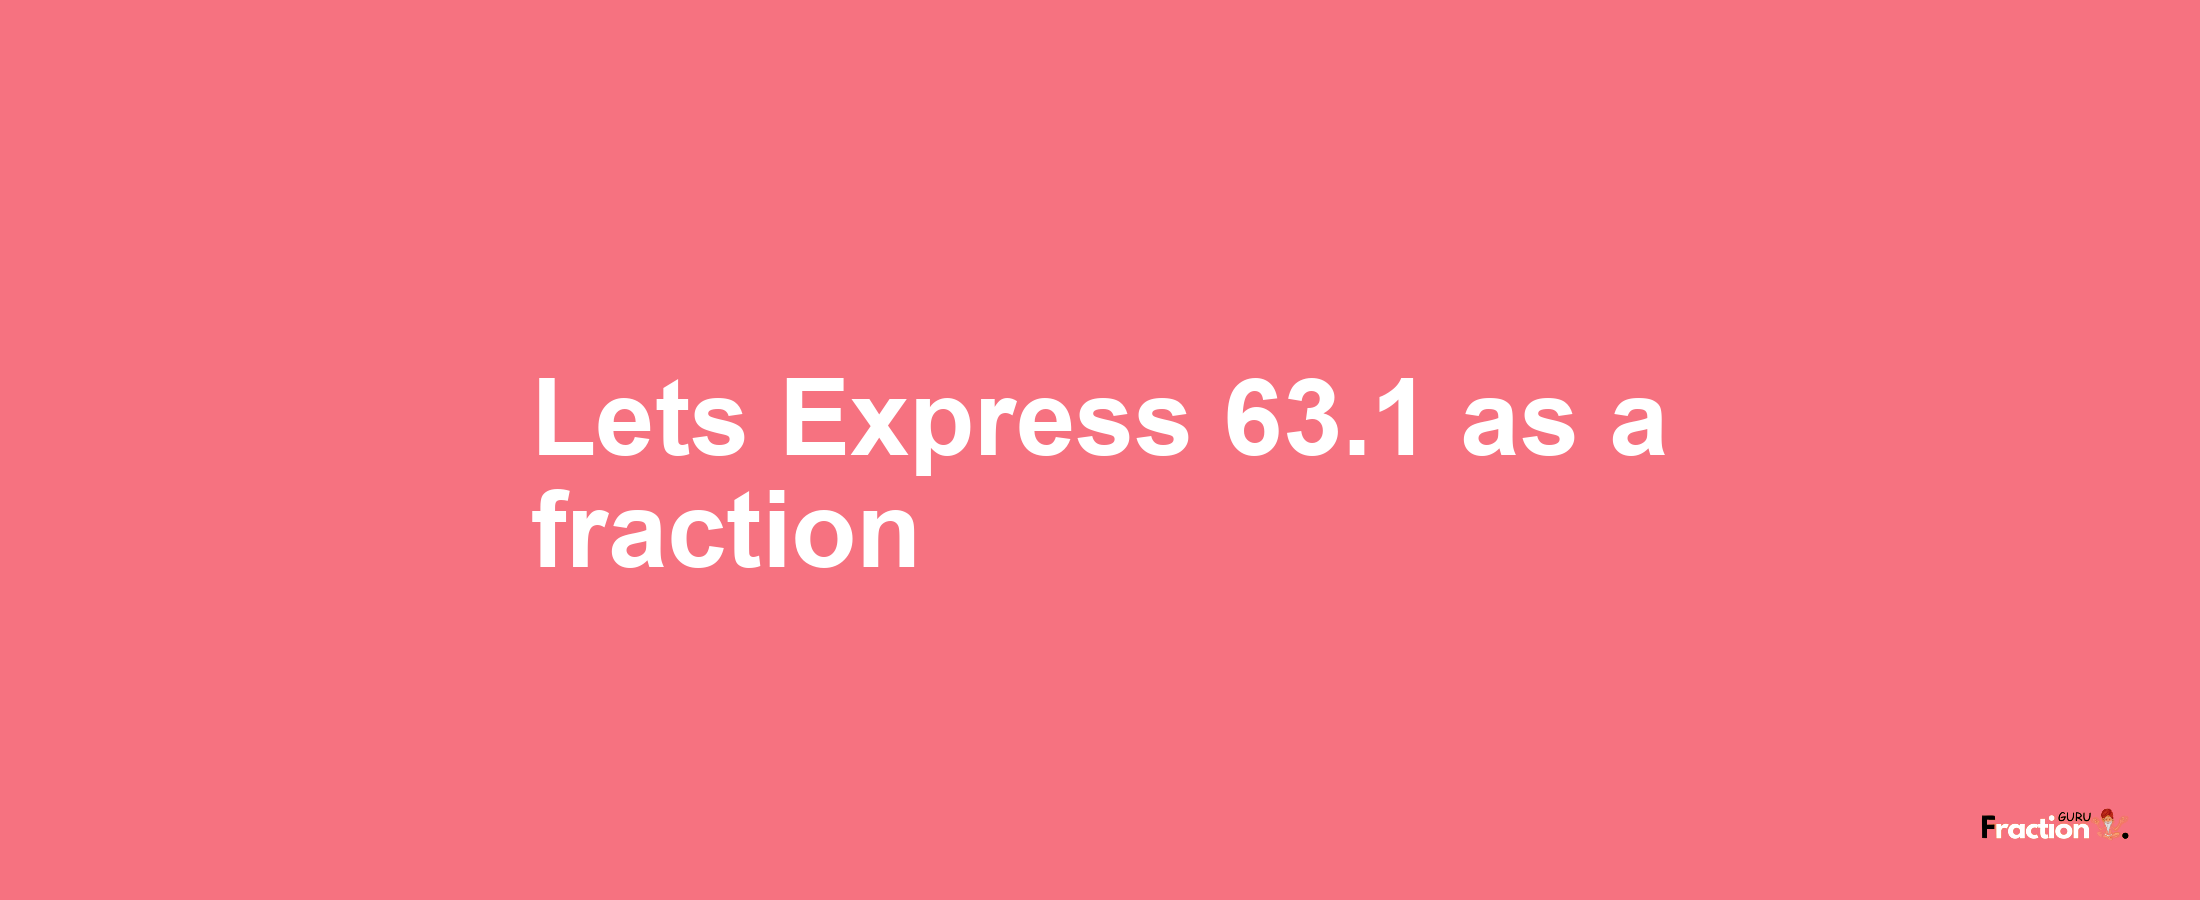 Lets Express 63.1 as afraction